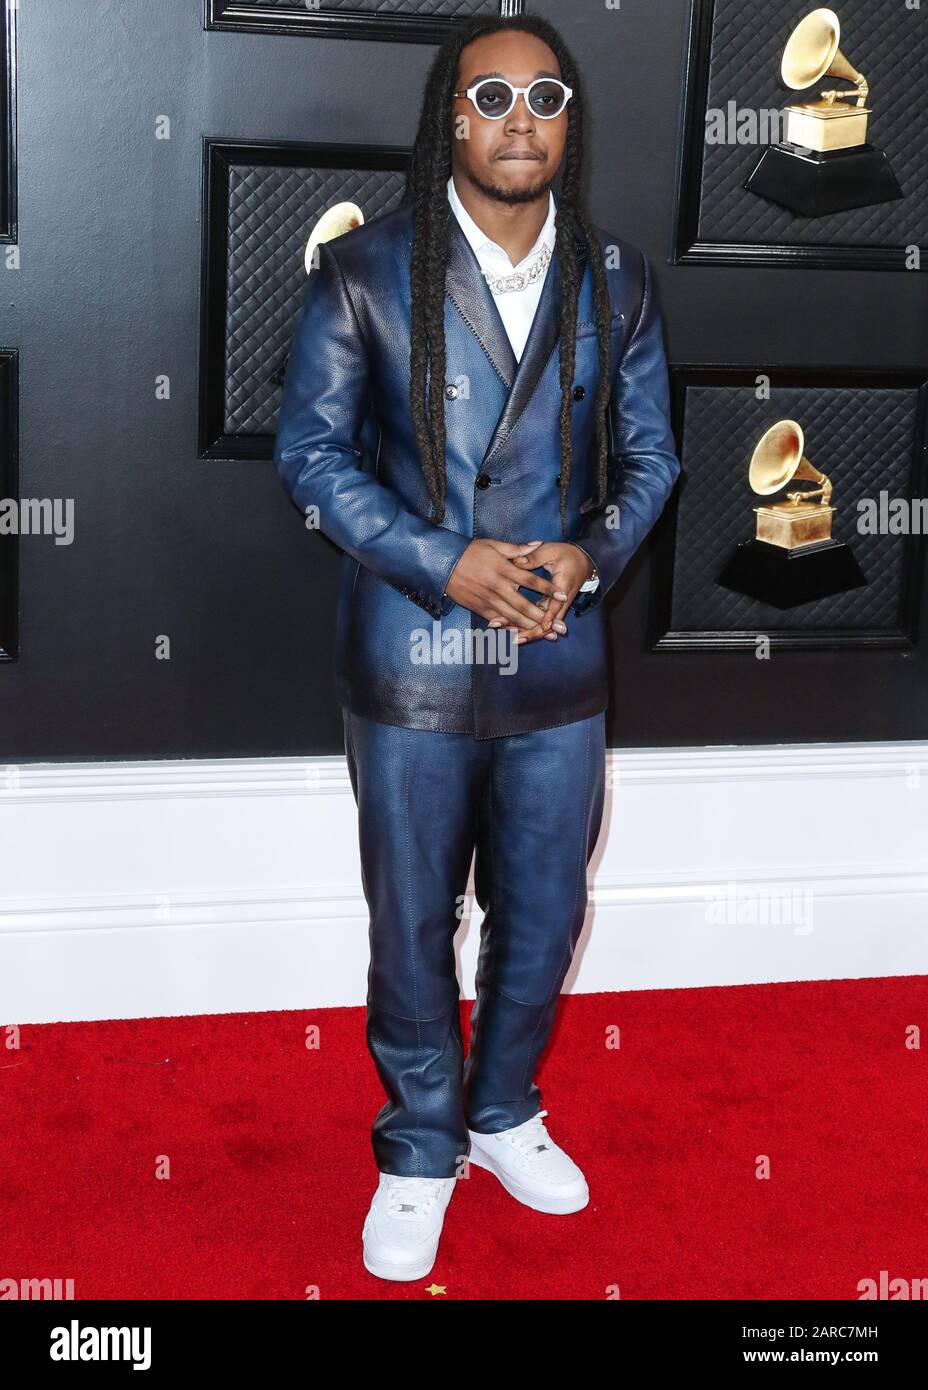 LOS ANGELES, CALIFORNIA, USA - JANUARY 26: Takeoff arrives at the 62nd Annual GRAMMY Awards held at Staples Center on January 26, 2020 in Los Angeles, California, United States. (Photo by Xavier Collin/Image Press Agency) Stock Photo